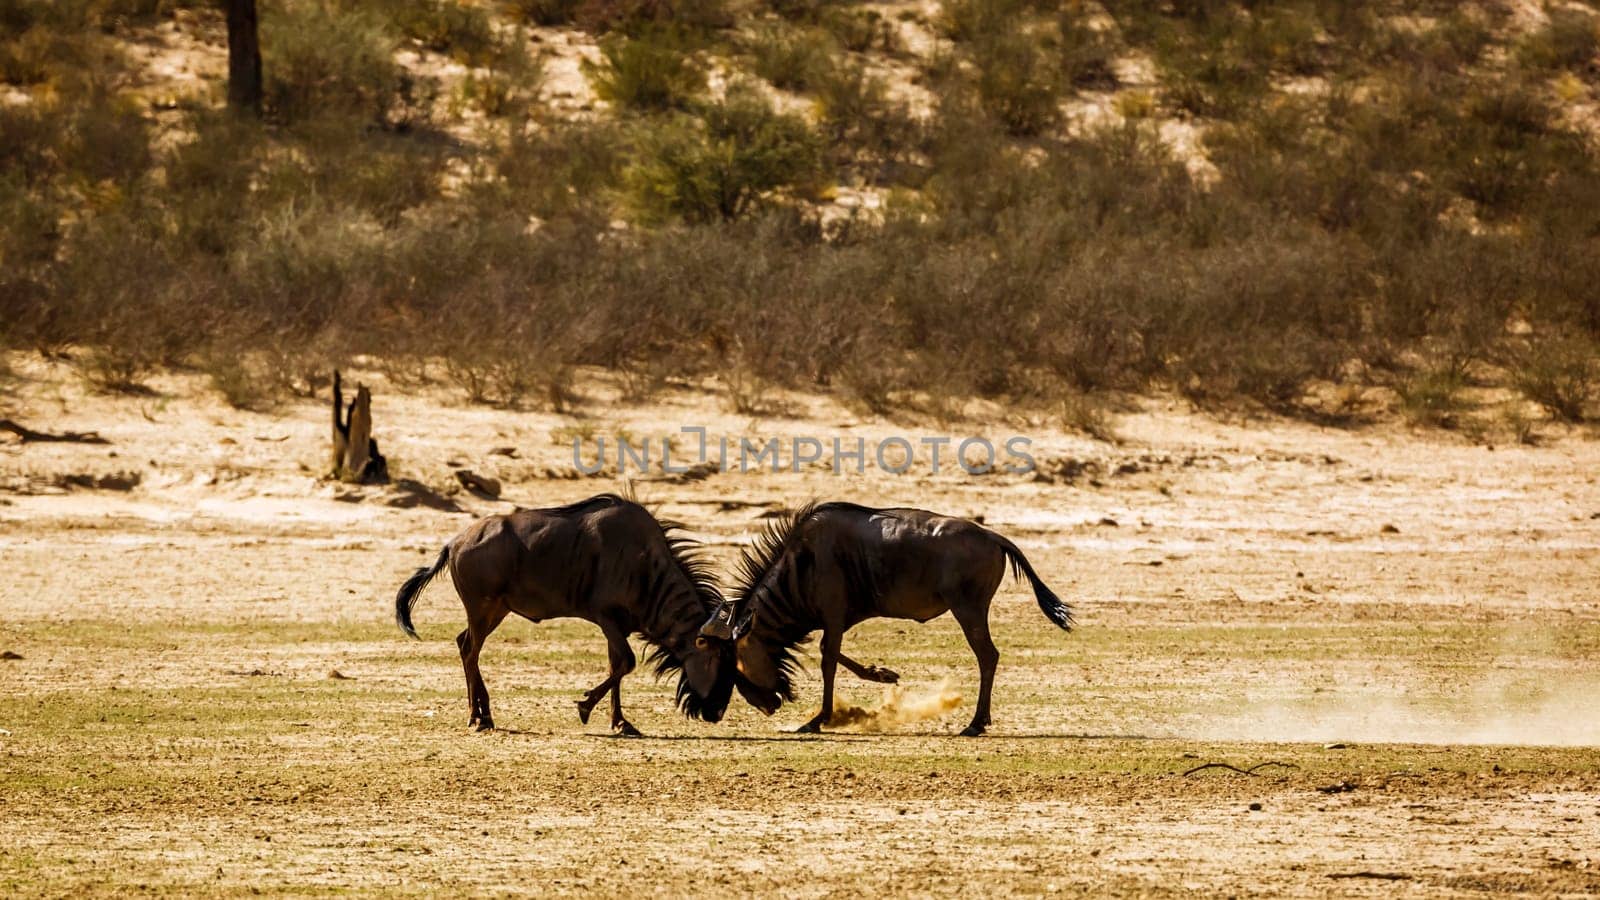 Blue wildebeest in Kgalagadi transfrontier park, South Africa by PACOCOMO